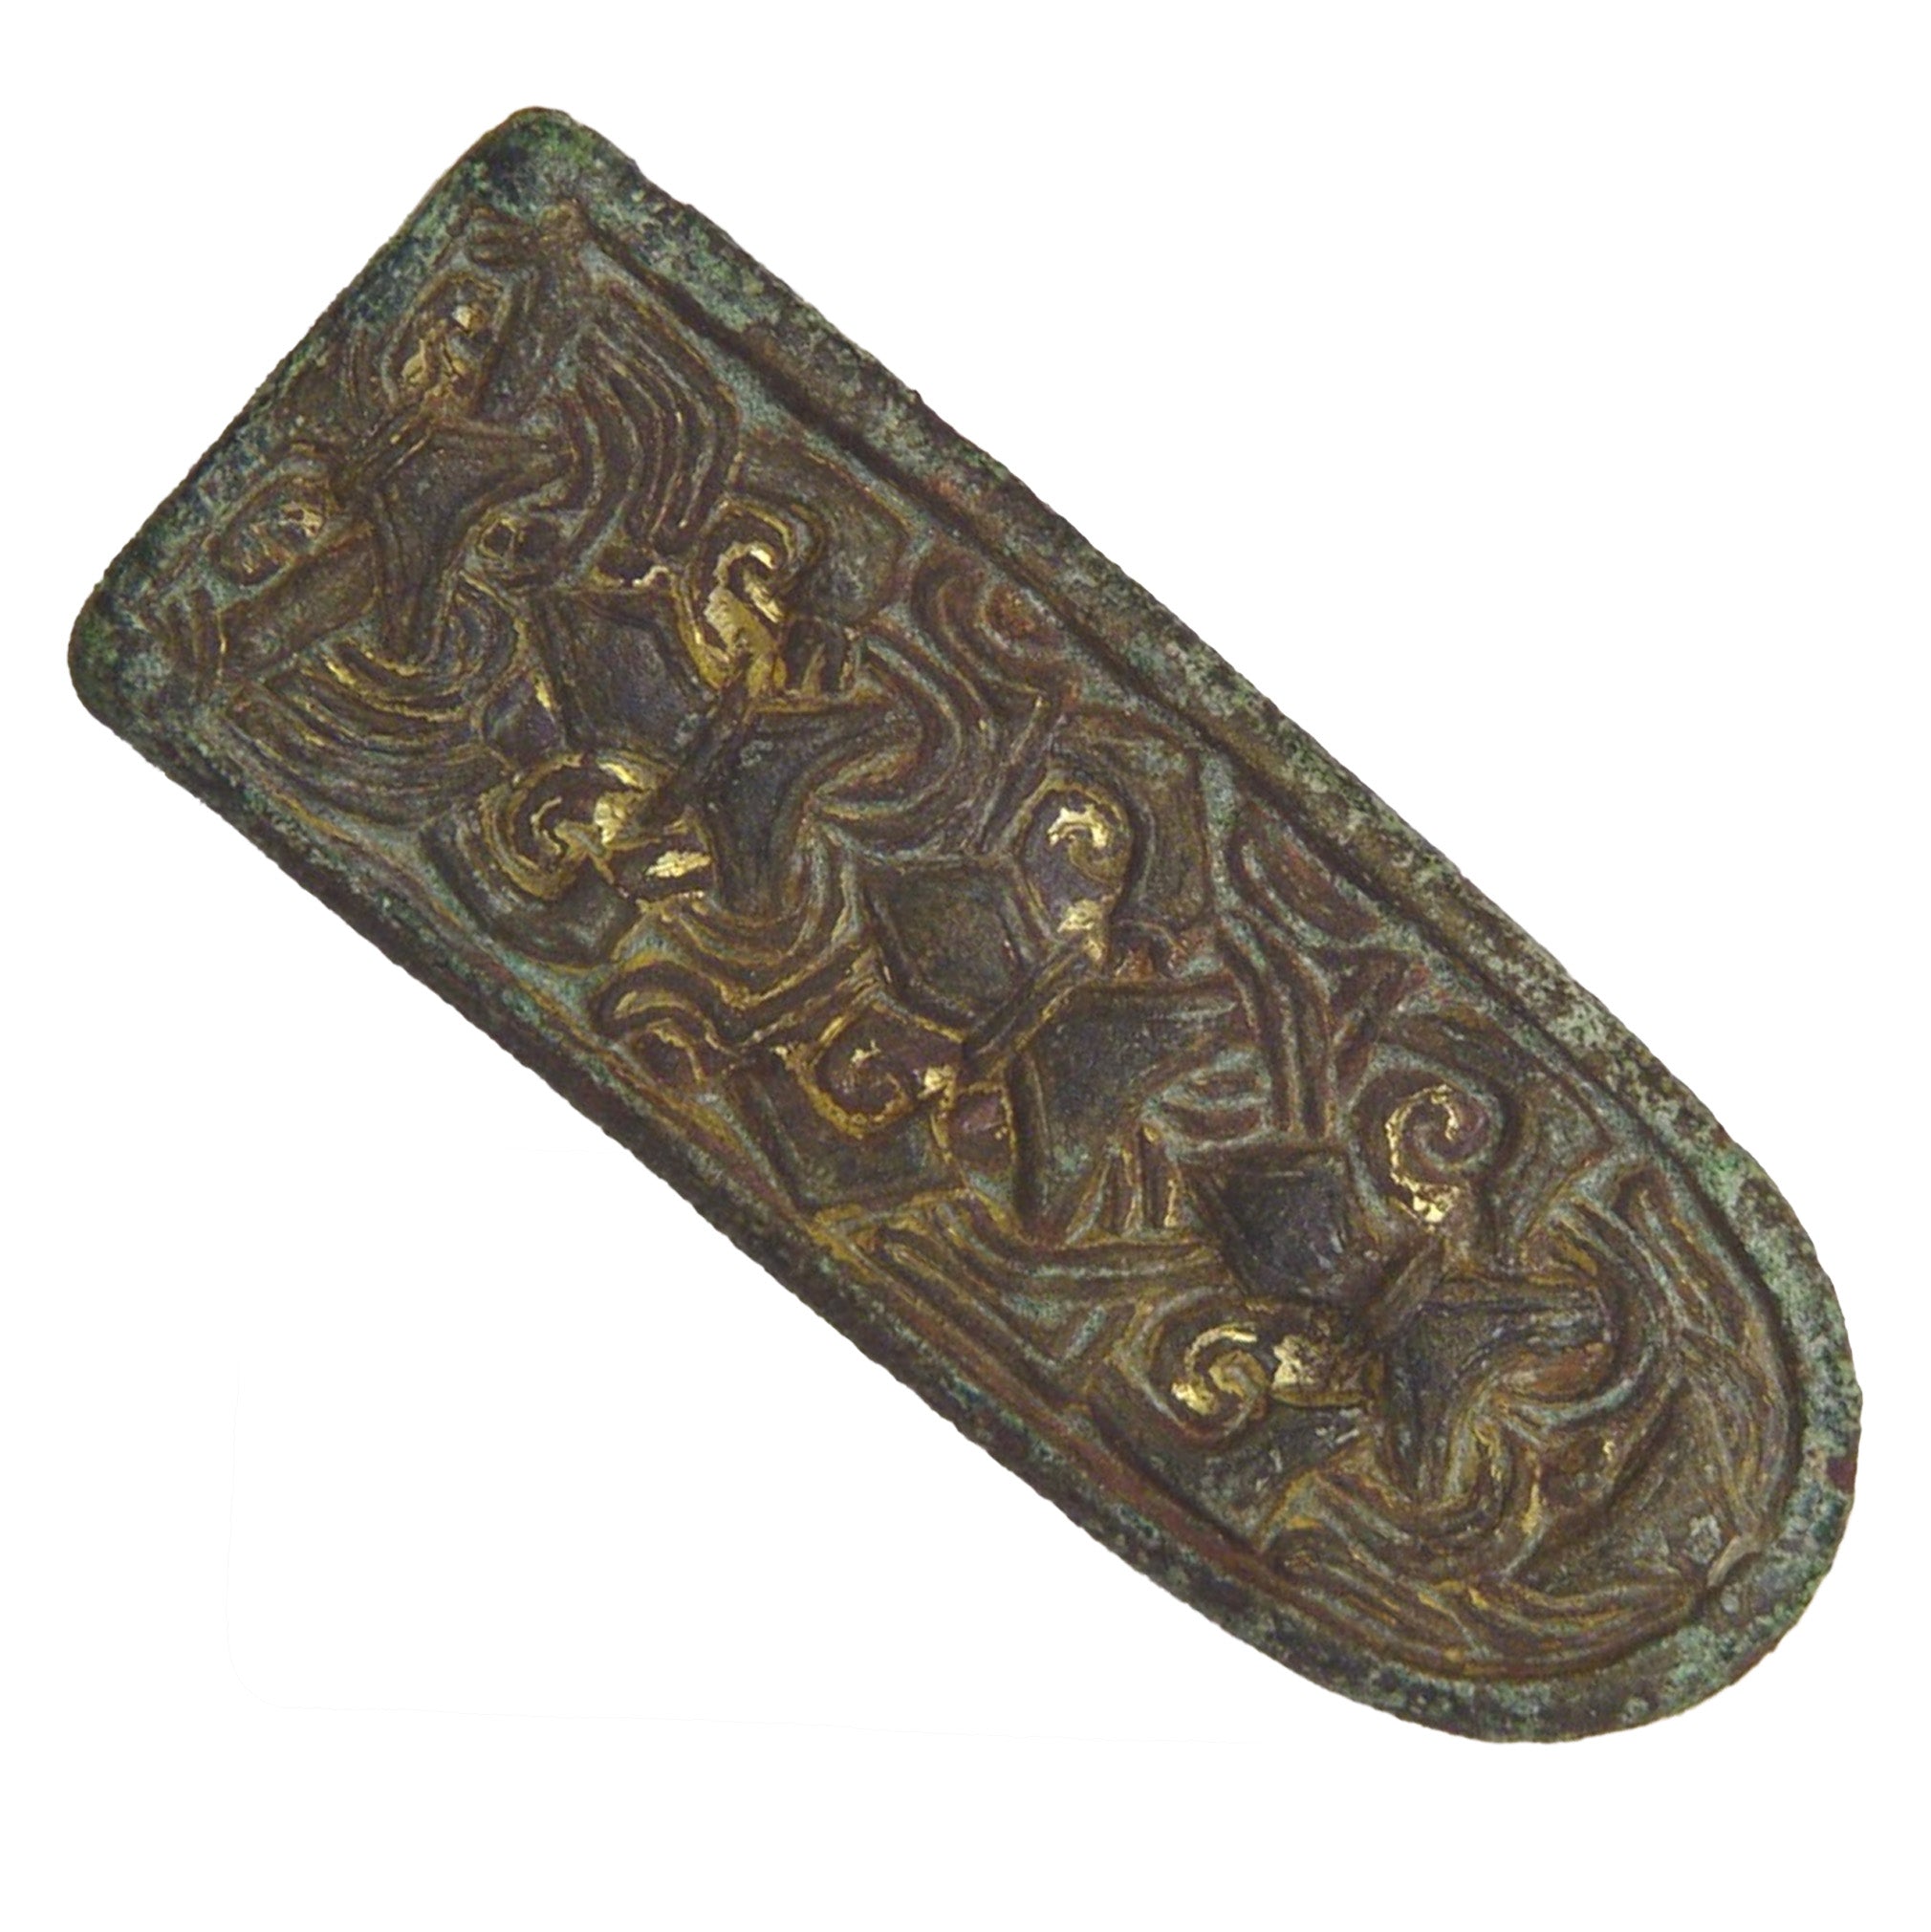 Original Borre Style Brooch from the British Museum